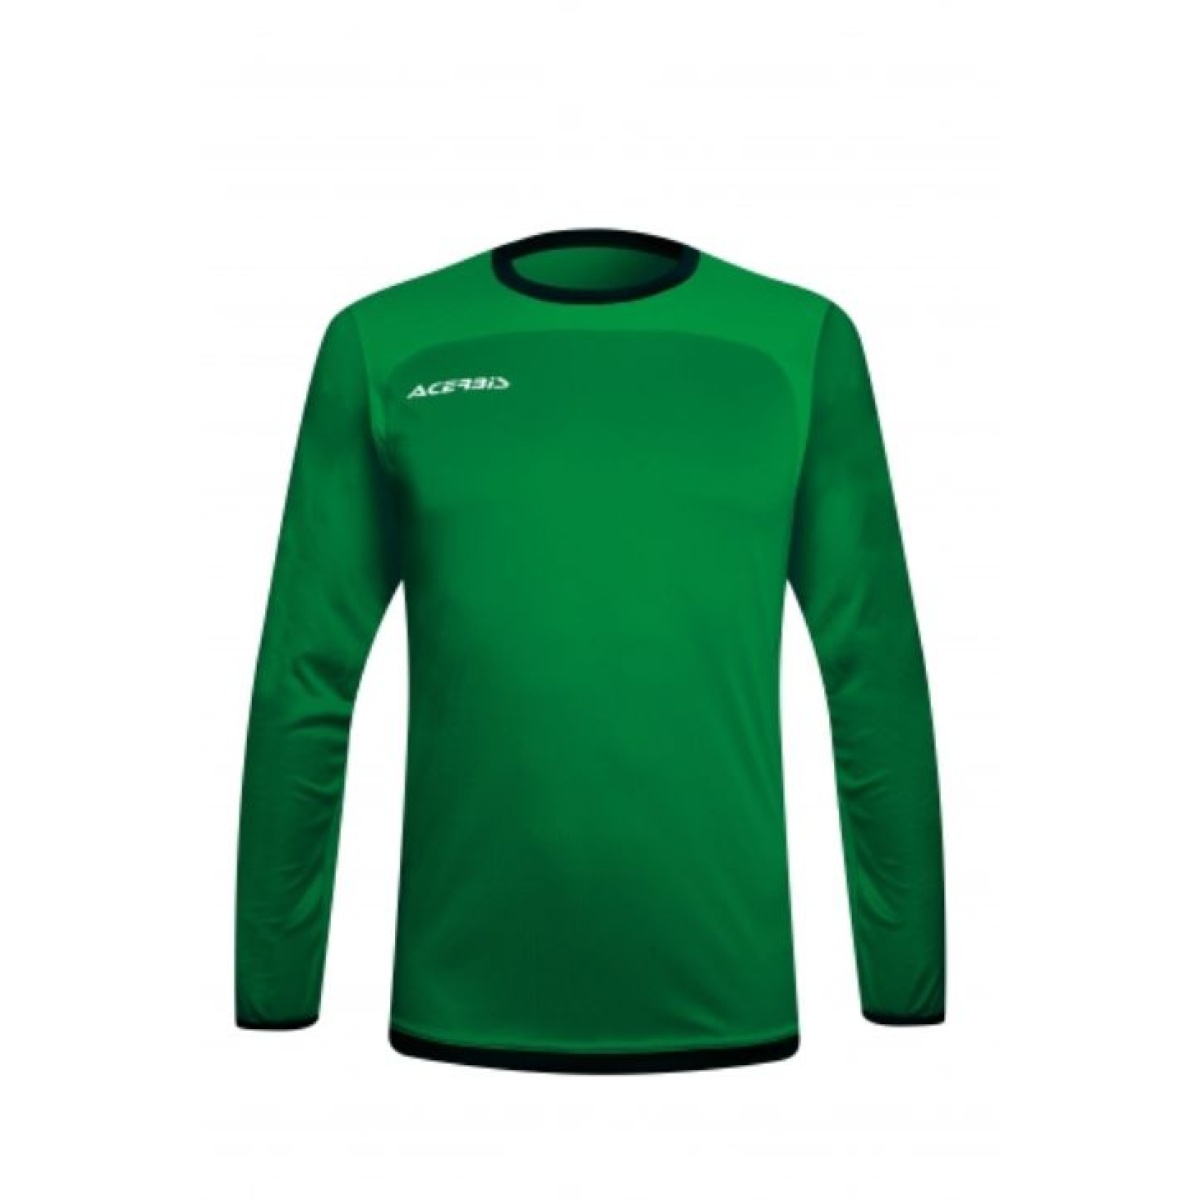 Canvey Island Youth FC - CIYFC Home GK Jersey, Canvey Island Youth FC, Canvey Island United FC, Custom Image Product